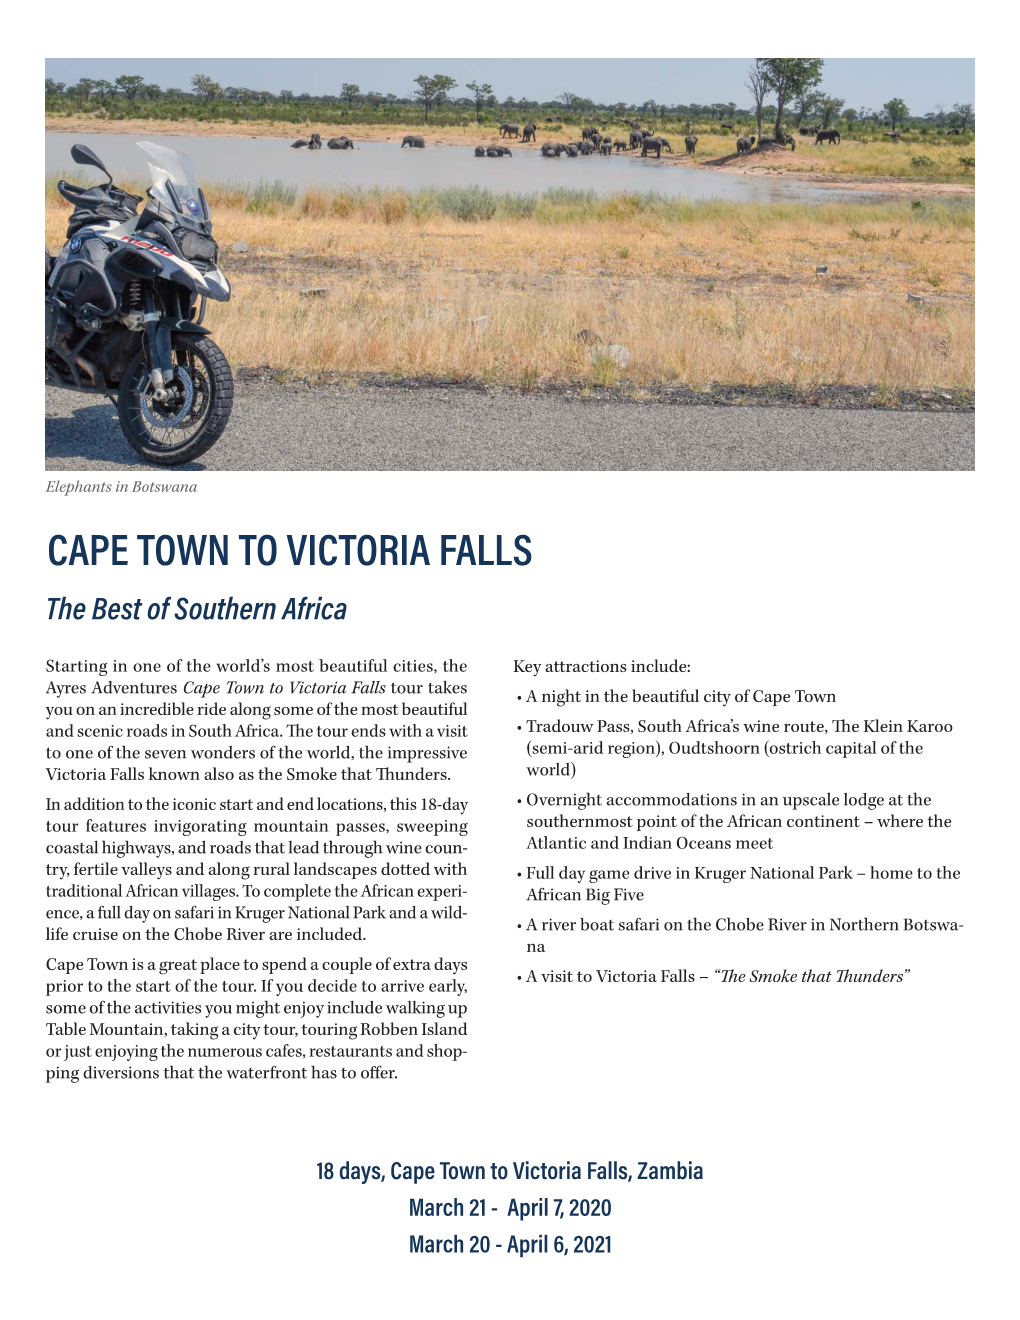 CAPE TOWN to VICTORIA FALLS the Best of Southern Africa